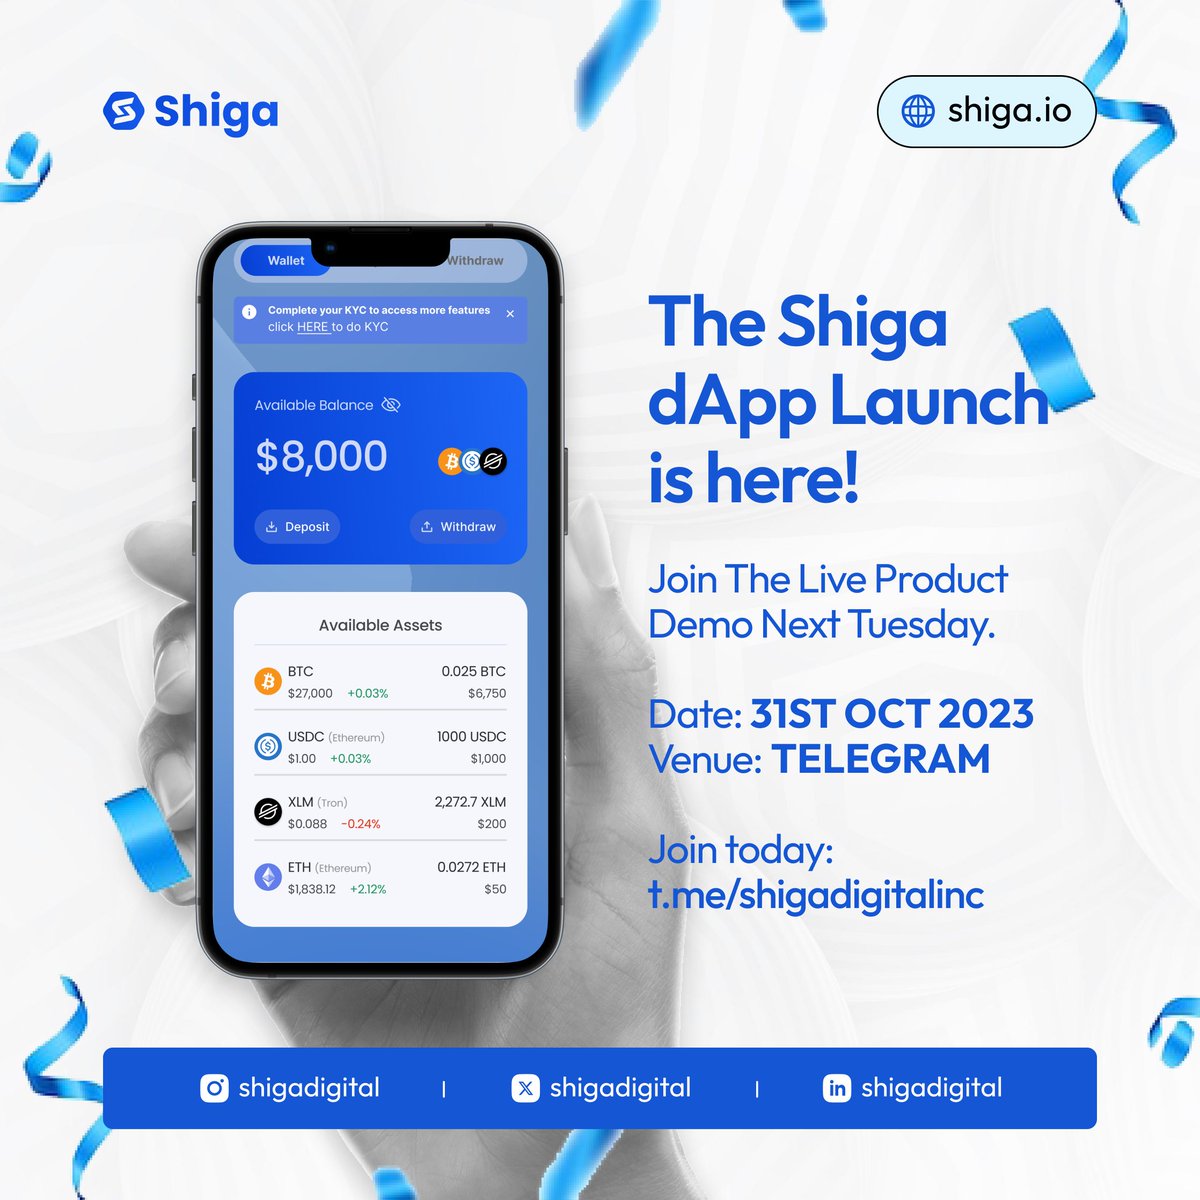 Our beta testing phase is almost here🥁,

And we're inviting you to join our live product demo next Tuesday 

For a full scoop on how our DApp works💯.

Join our Telegram community today: t.me/shigadigitalinc

🕒  31st-Oct

#shigadigital #testnet #productdemo